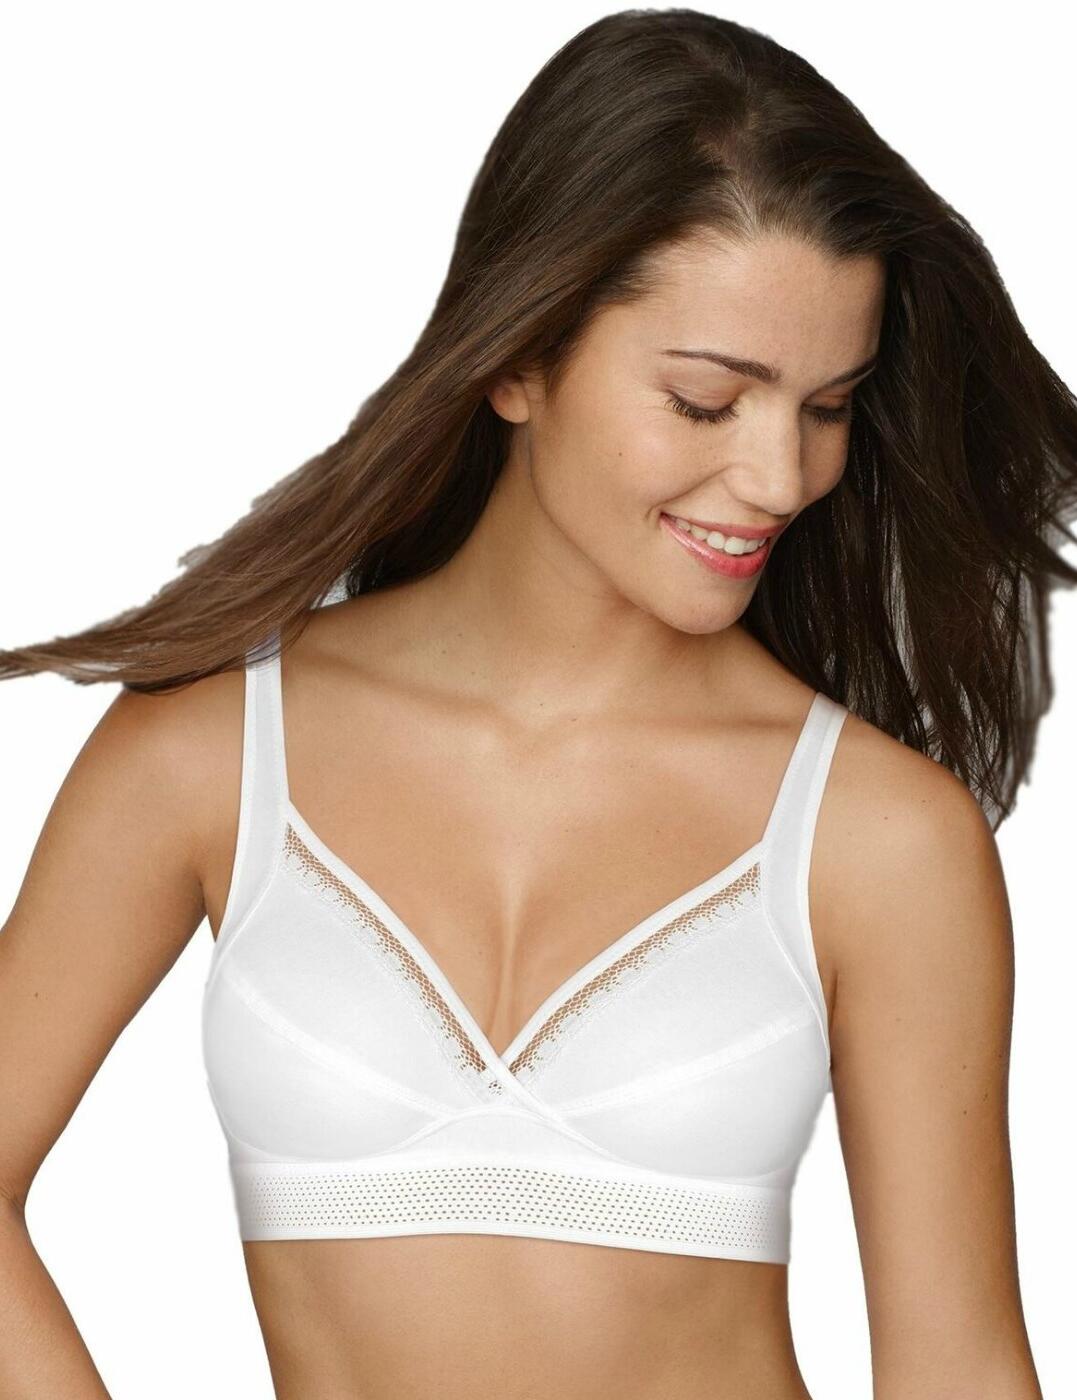 P06TO Playtex Feel Good Support Cotton Soft Cup Bra - P06TO White